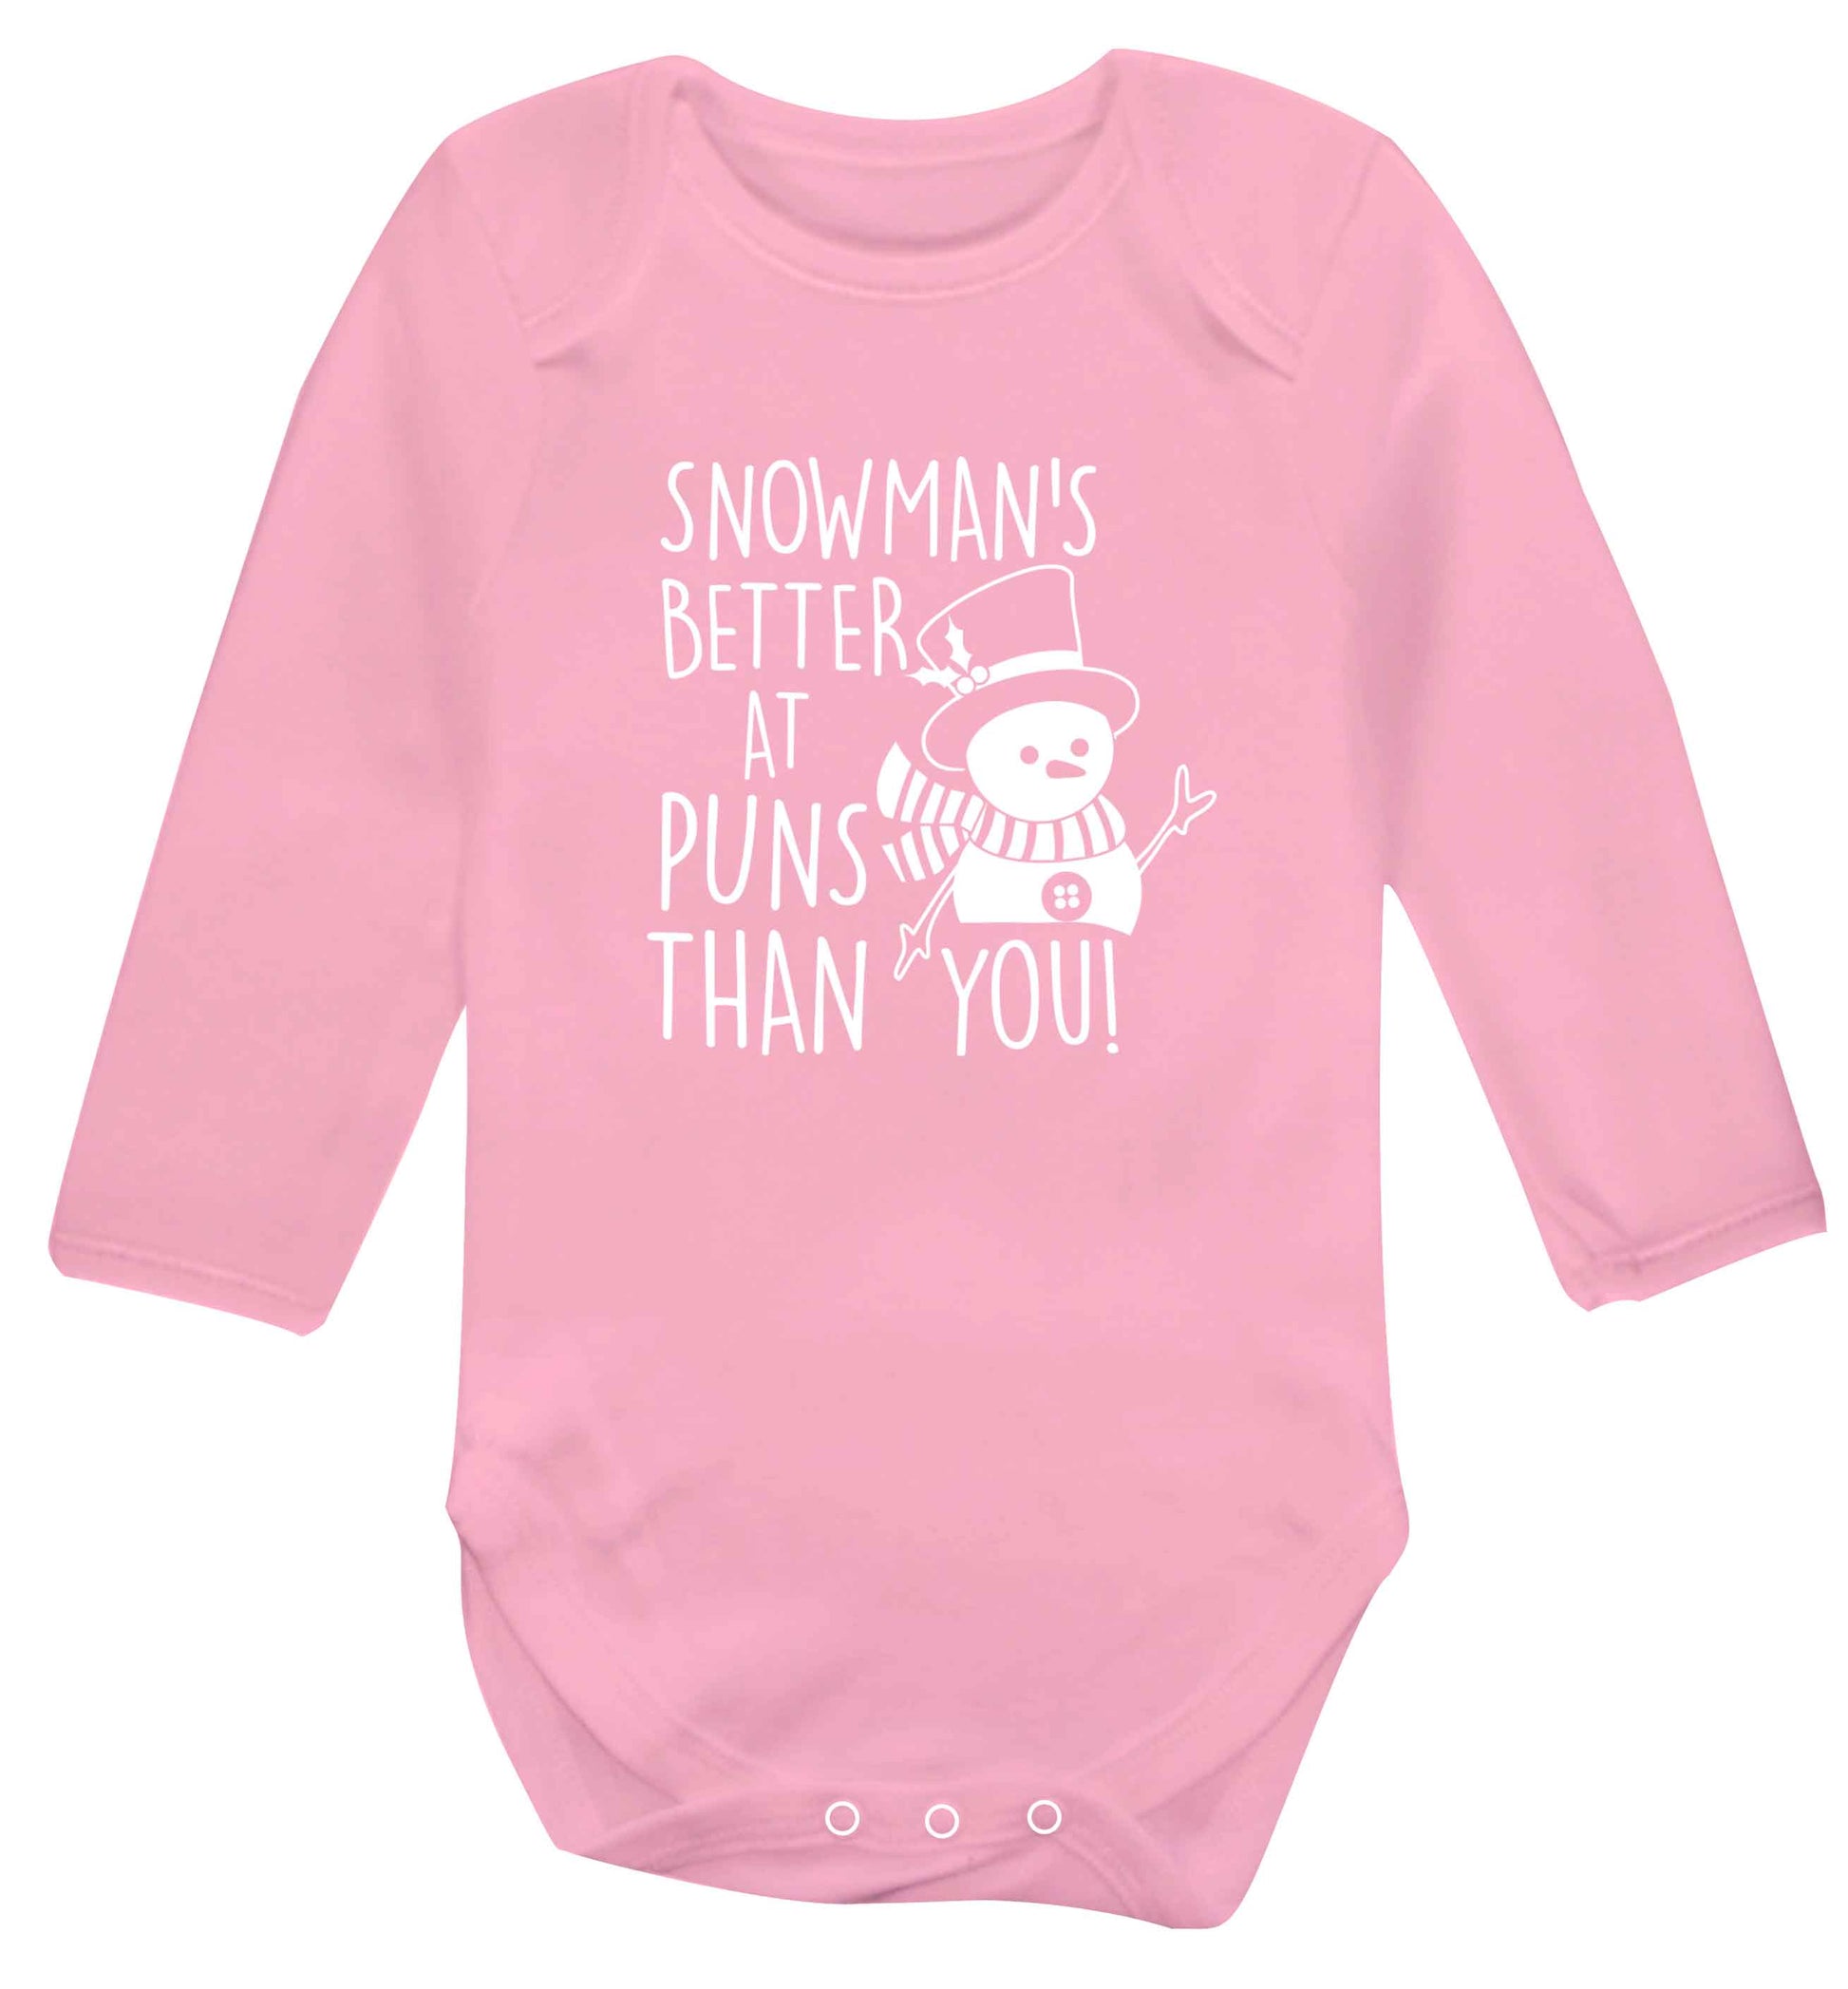 Snowman's Puns You baby vest long sleeved pale pink 6-12 months